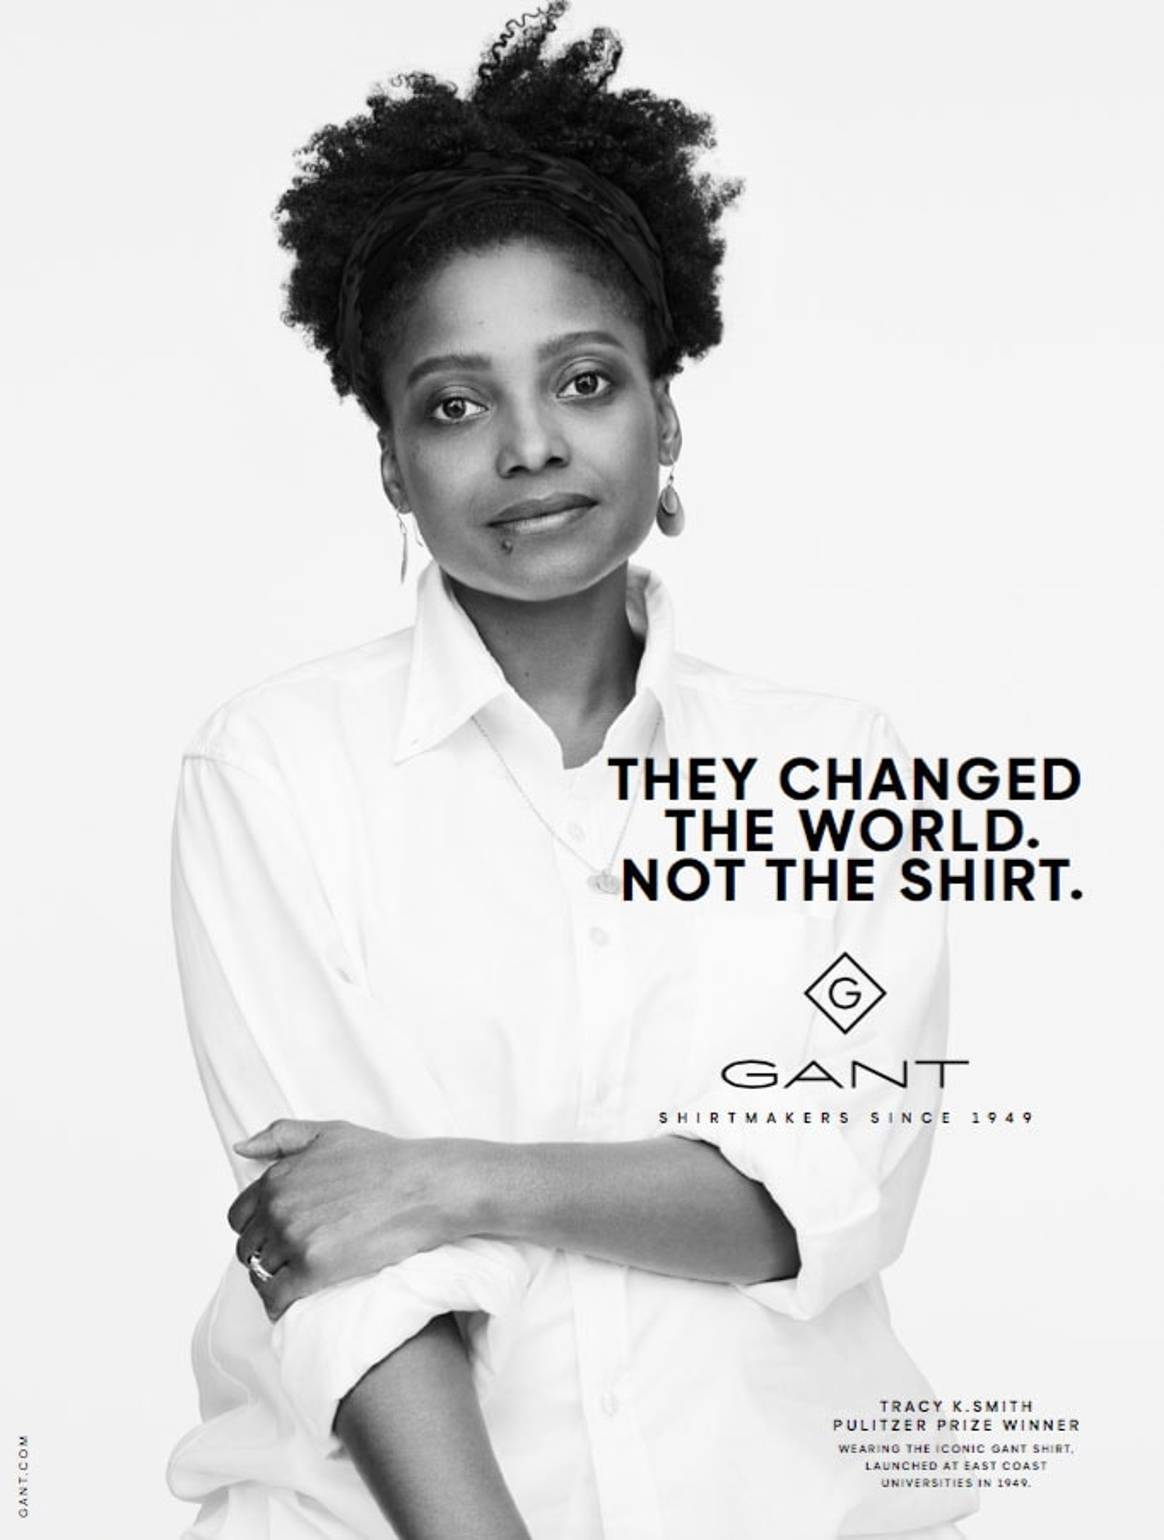 Gant relaunches with new sub-brand